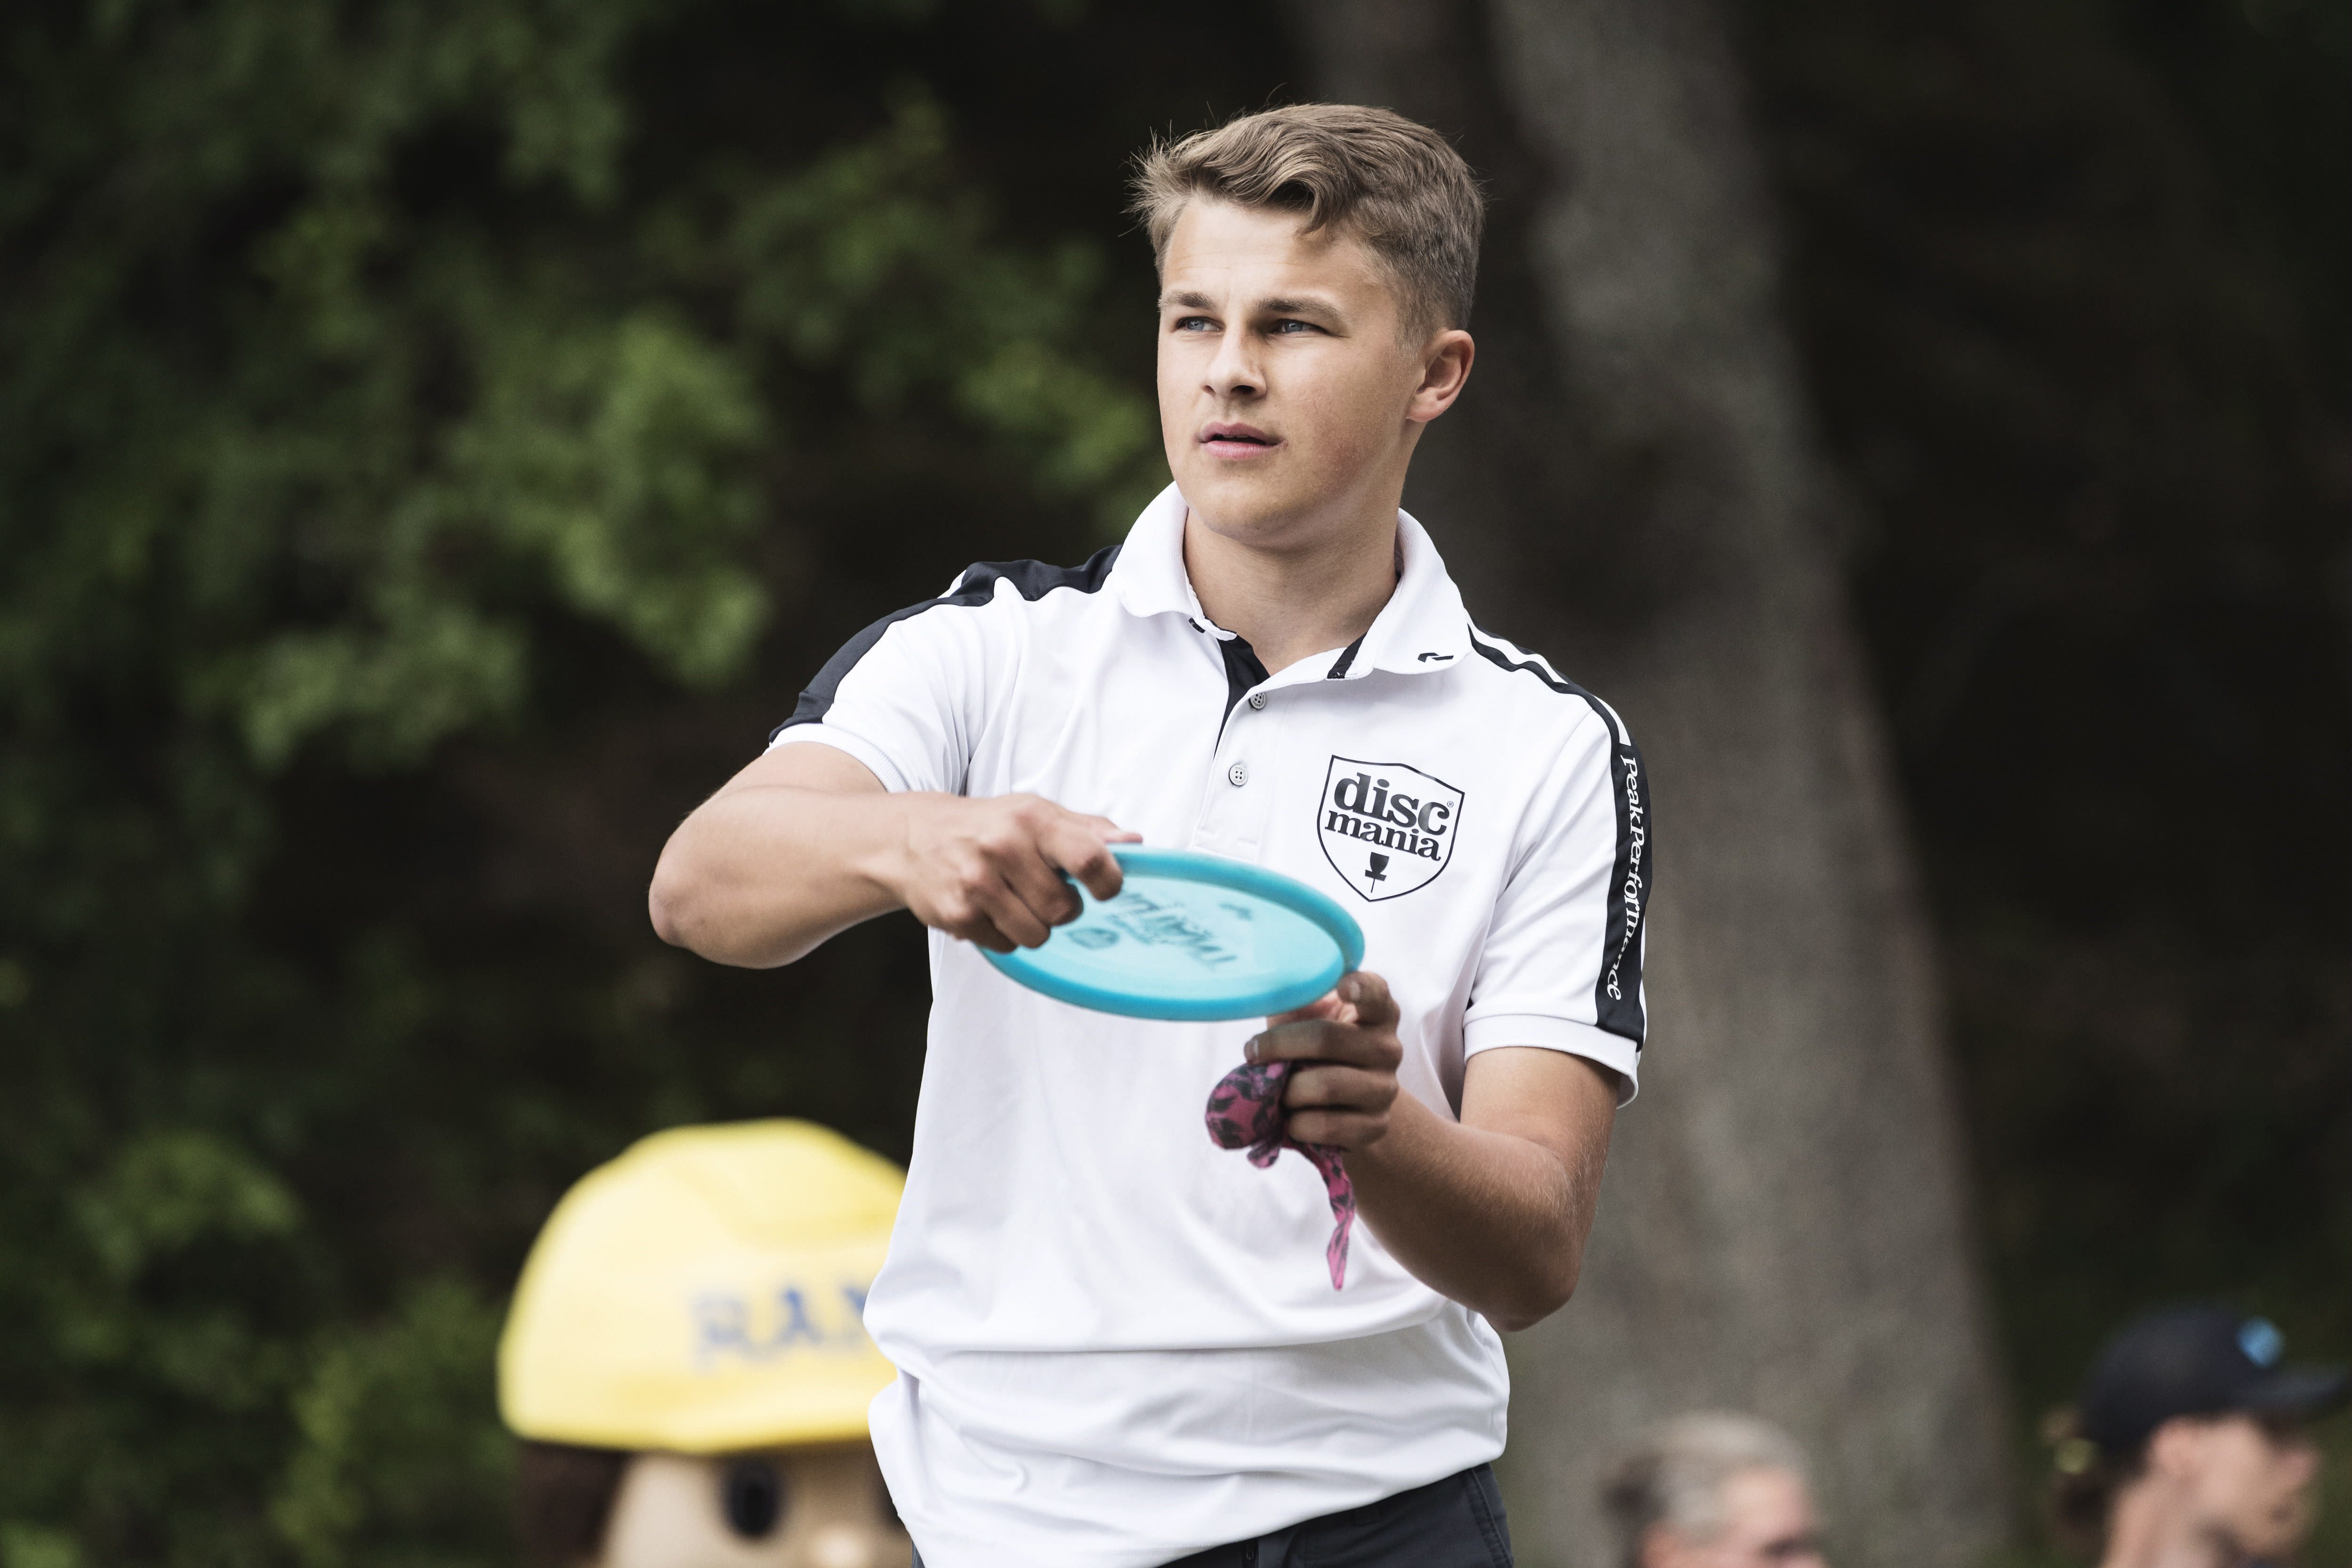 Finland’s goal is to become a disc golf superpower with a new national team